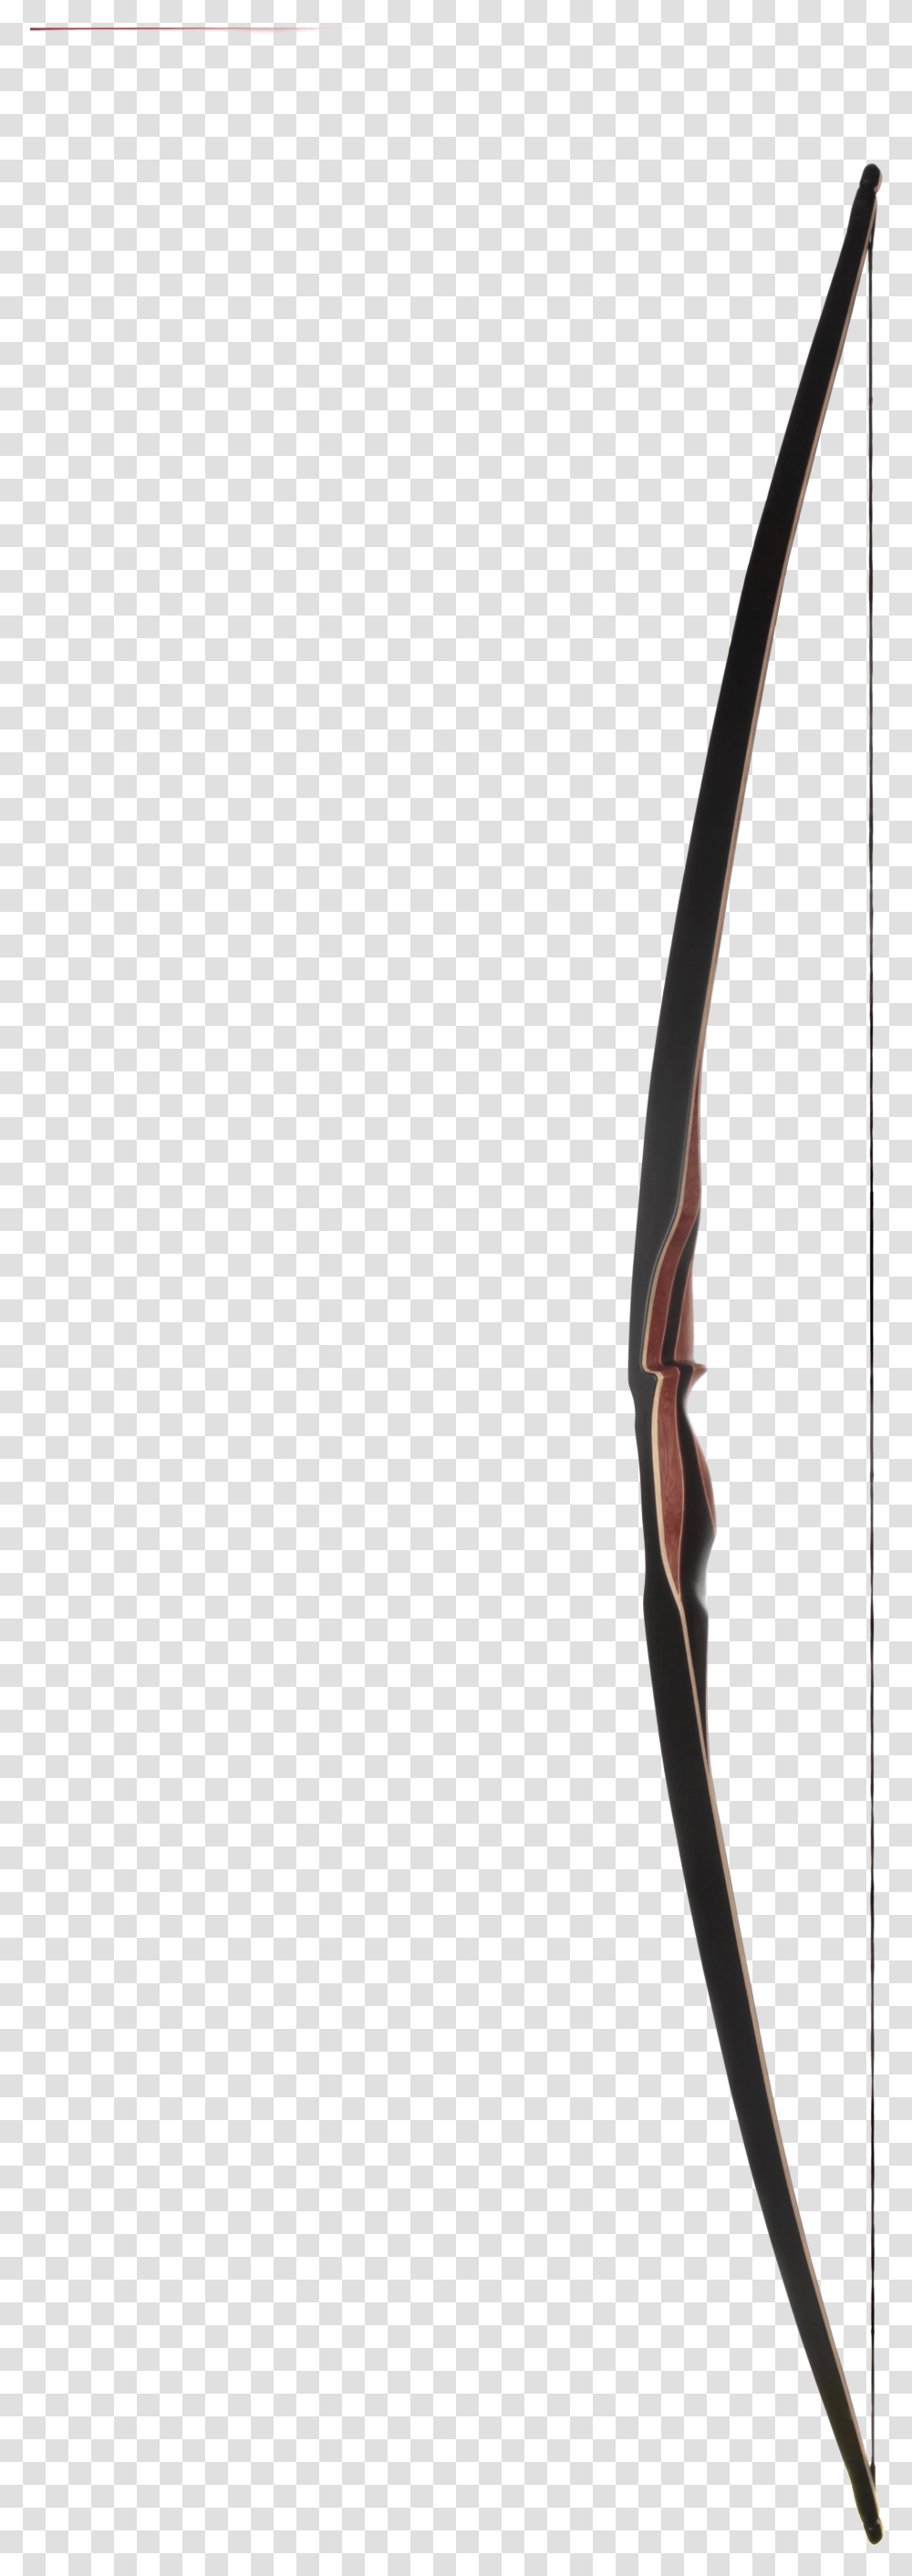 Middle Ages Larp Bows Bow And Arrow Recurve Medieval Longbow, Archery, Sport, Sports Transparent Png